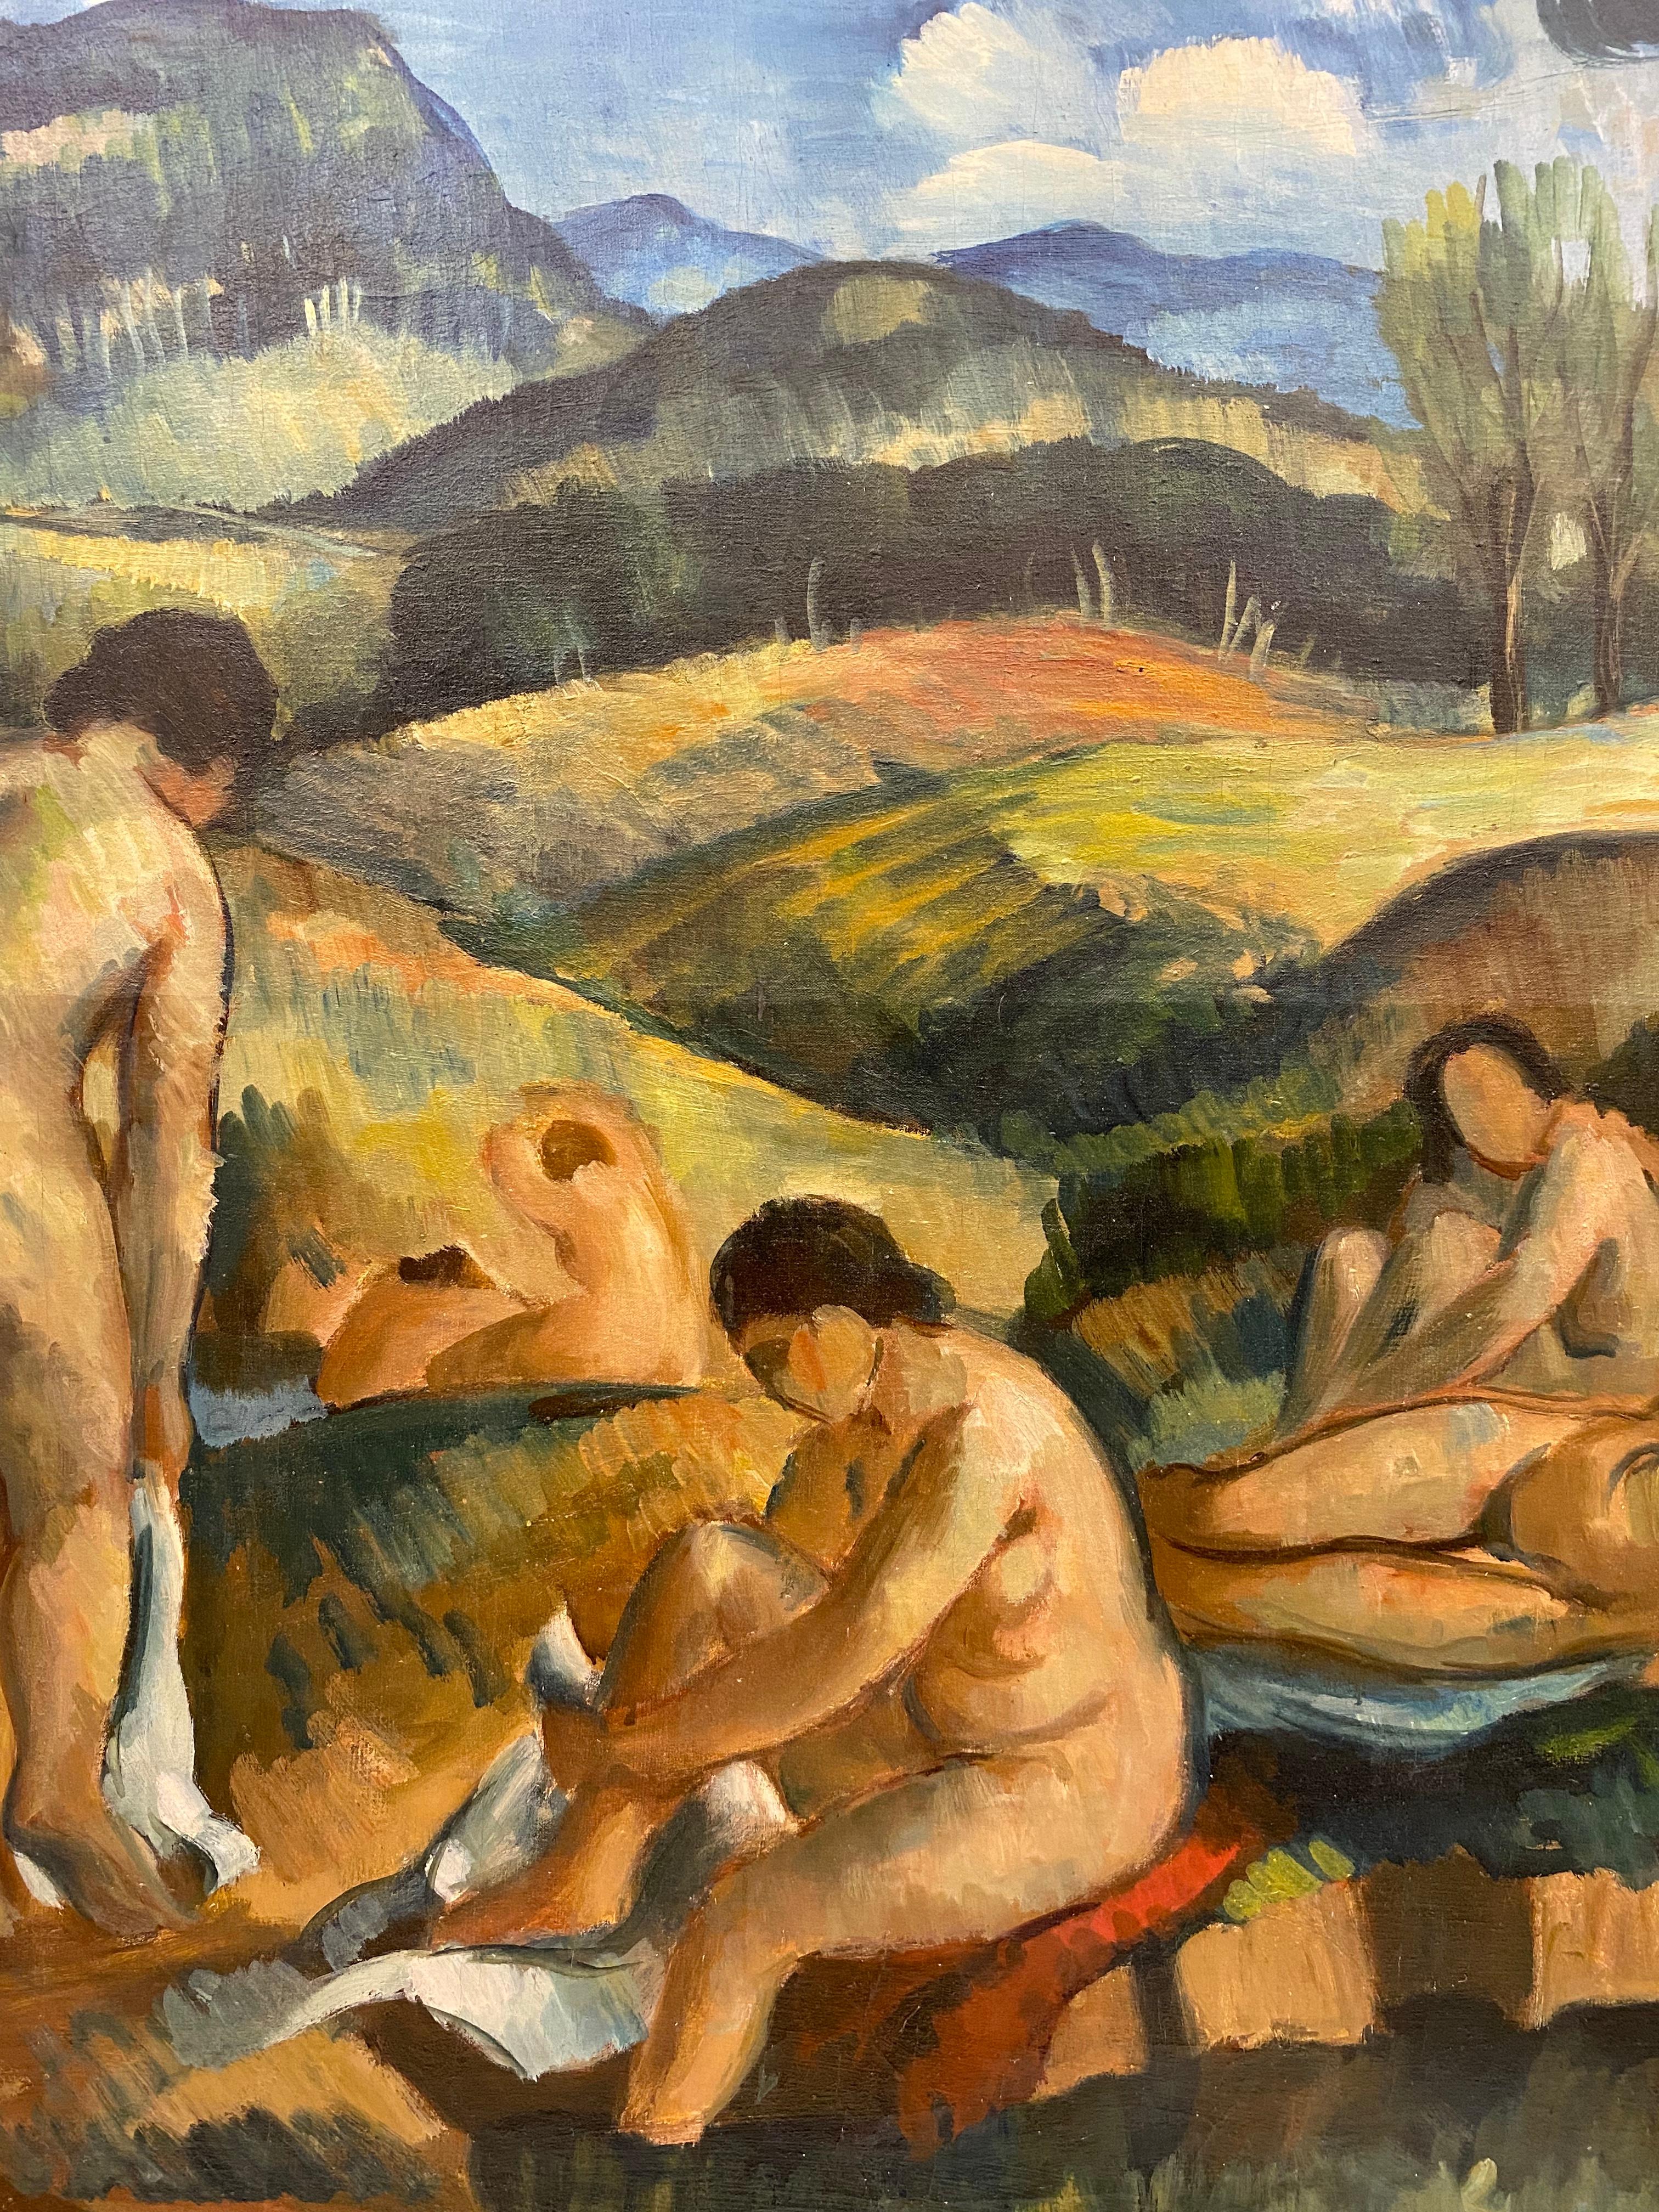 The Bathers Painting in the Manner of Paul Cezanne For Sale 2